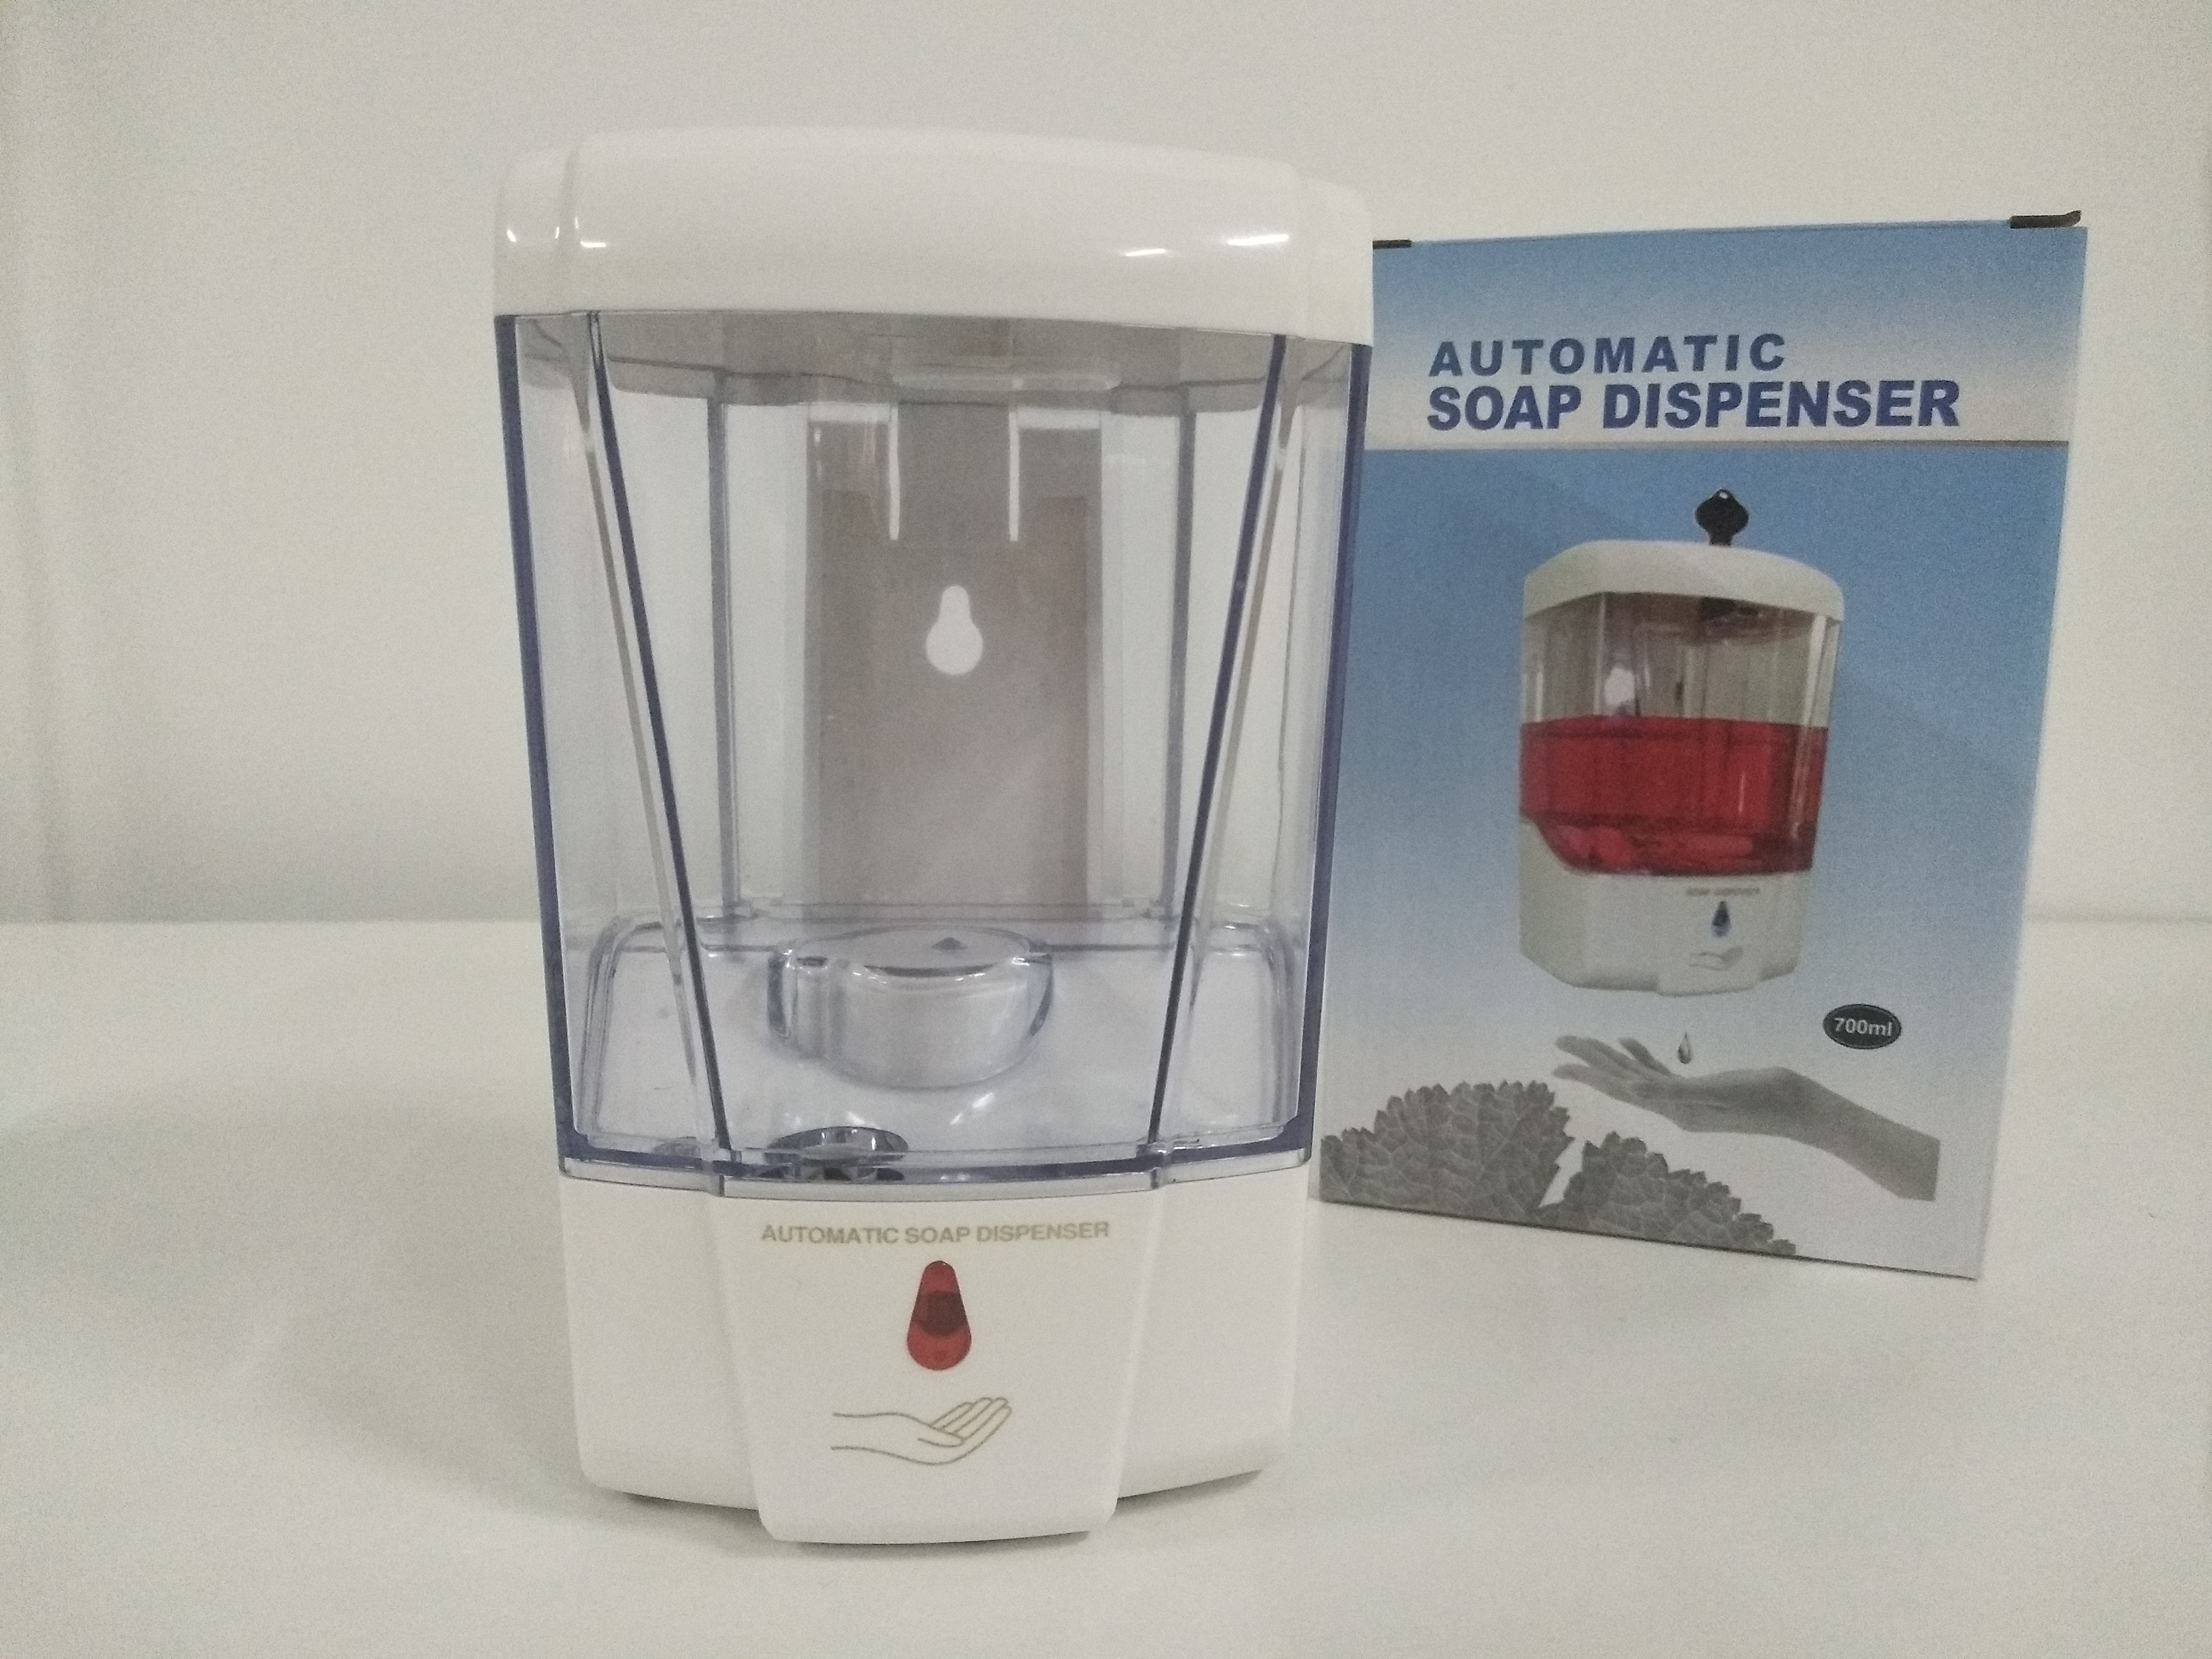 Yunboshi Soap Dispensers Helps Office Cleanliness